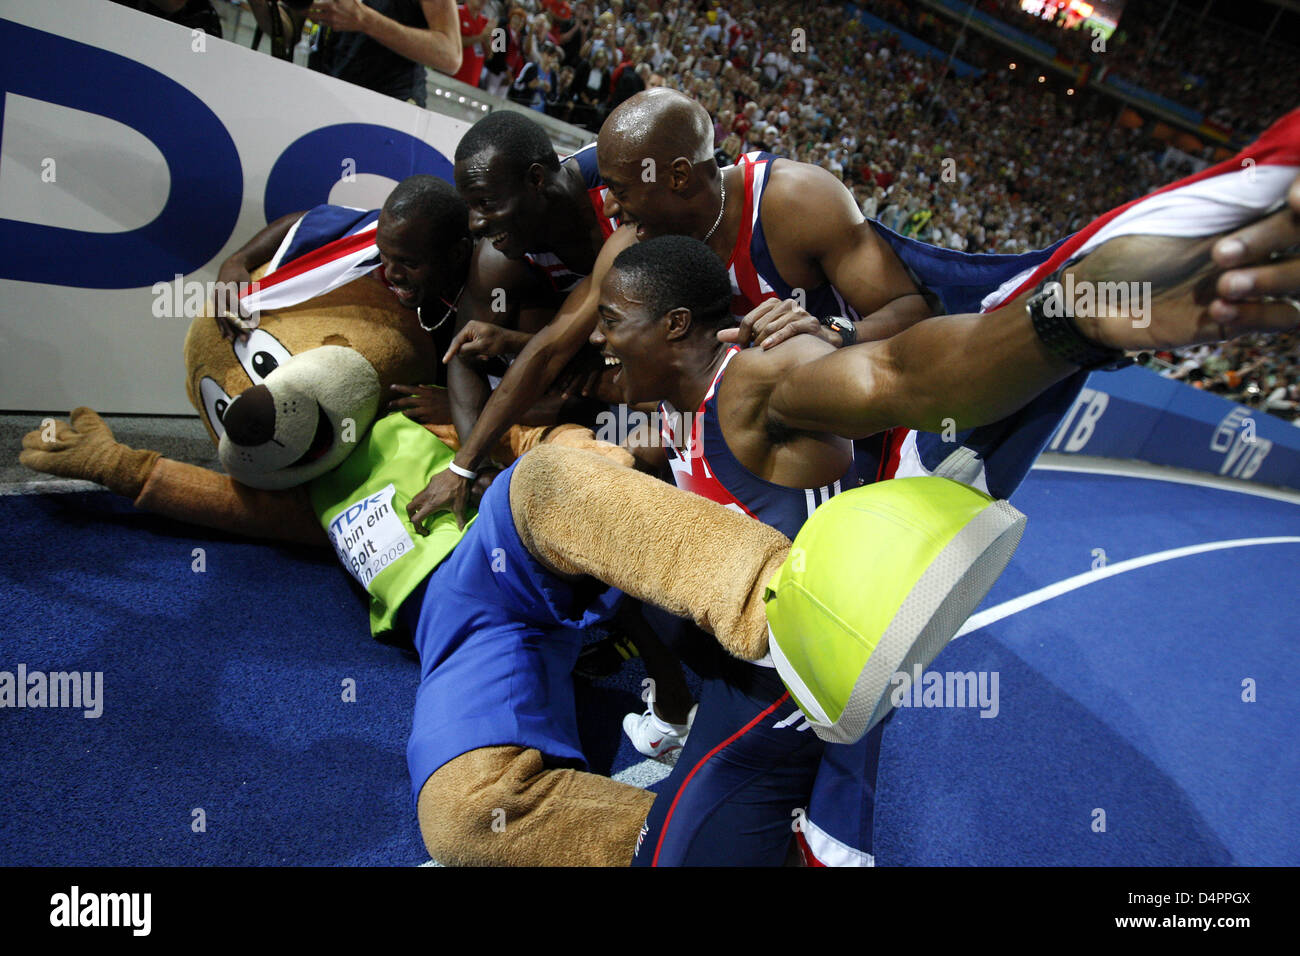 Great Britain?s 4x100m relay team celebrates with Mascot Berlino after winning the silver medal in teh 4x100m Relay finals at the 12th IAAF World Championships in Athletics Berlin 2009 in Berlin, Germany, 22 August 2009. Photo: Kay Nietfeld Stock Photo